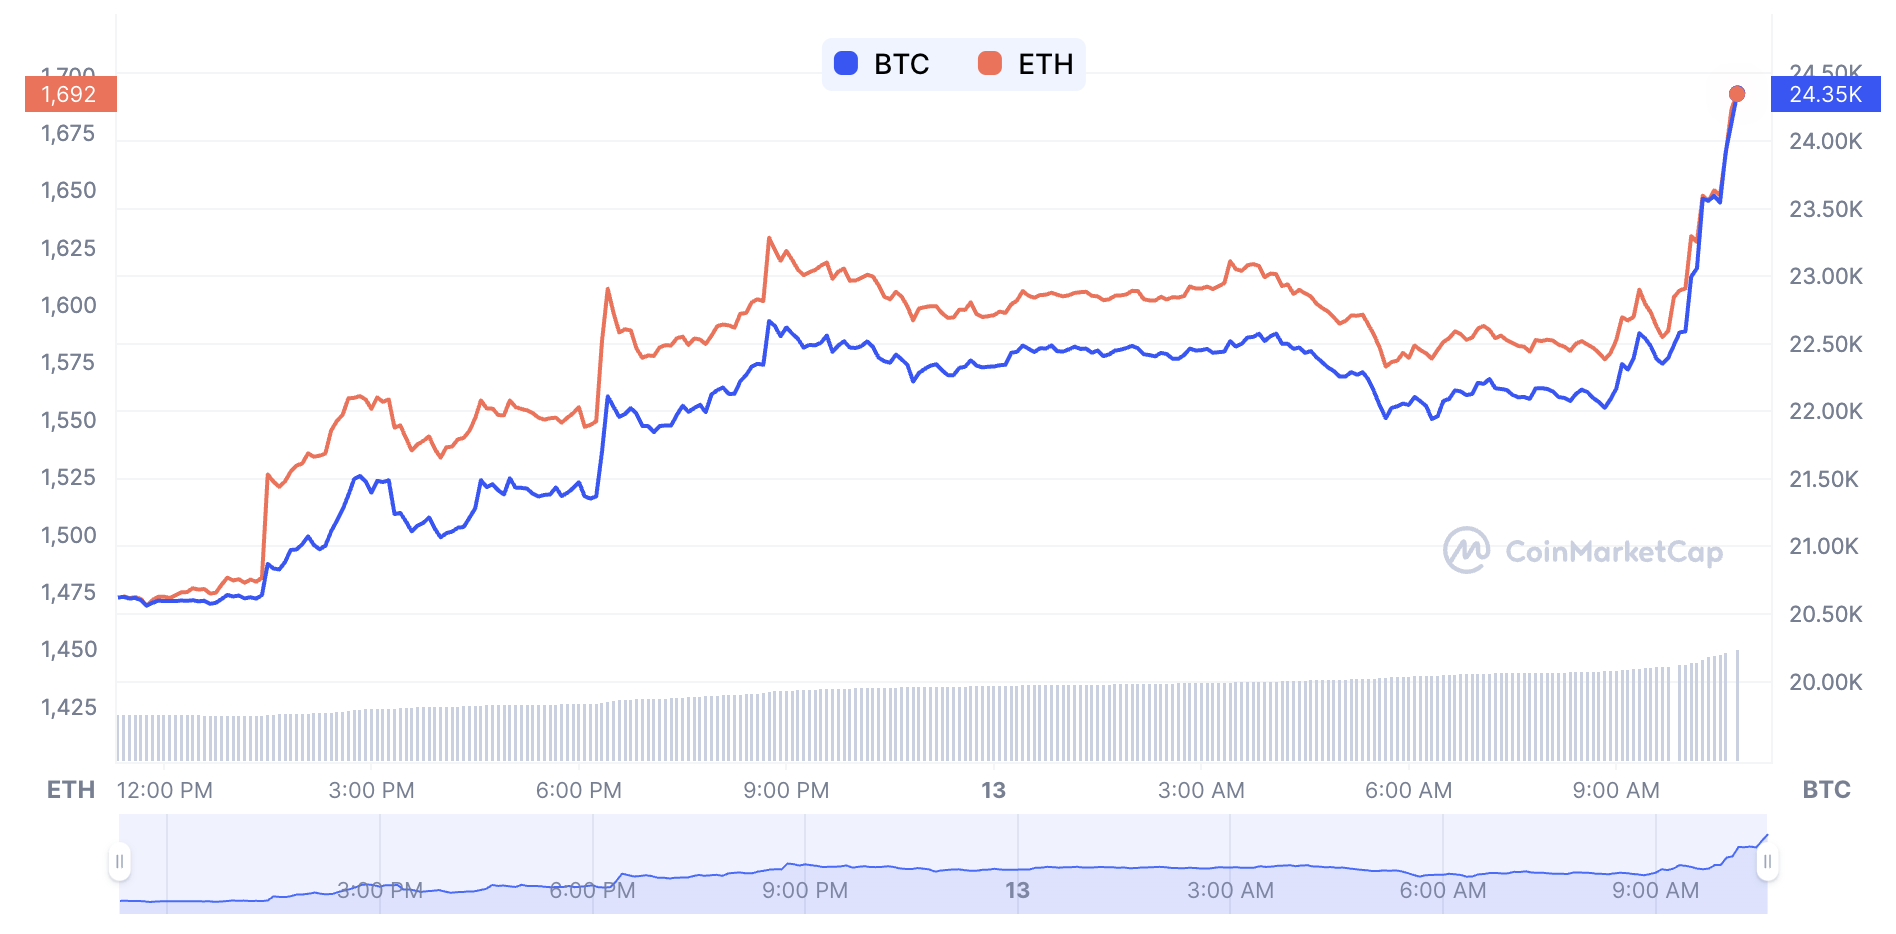 An image of bitcoin and ether prices compared to USD over the past 24 hours